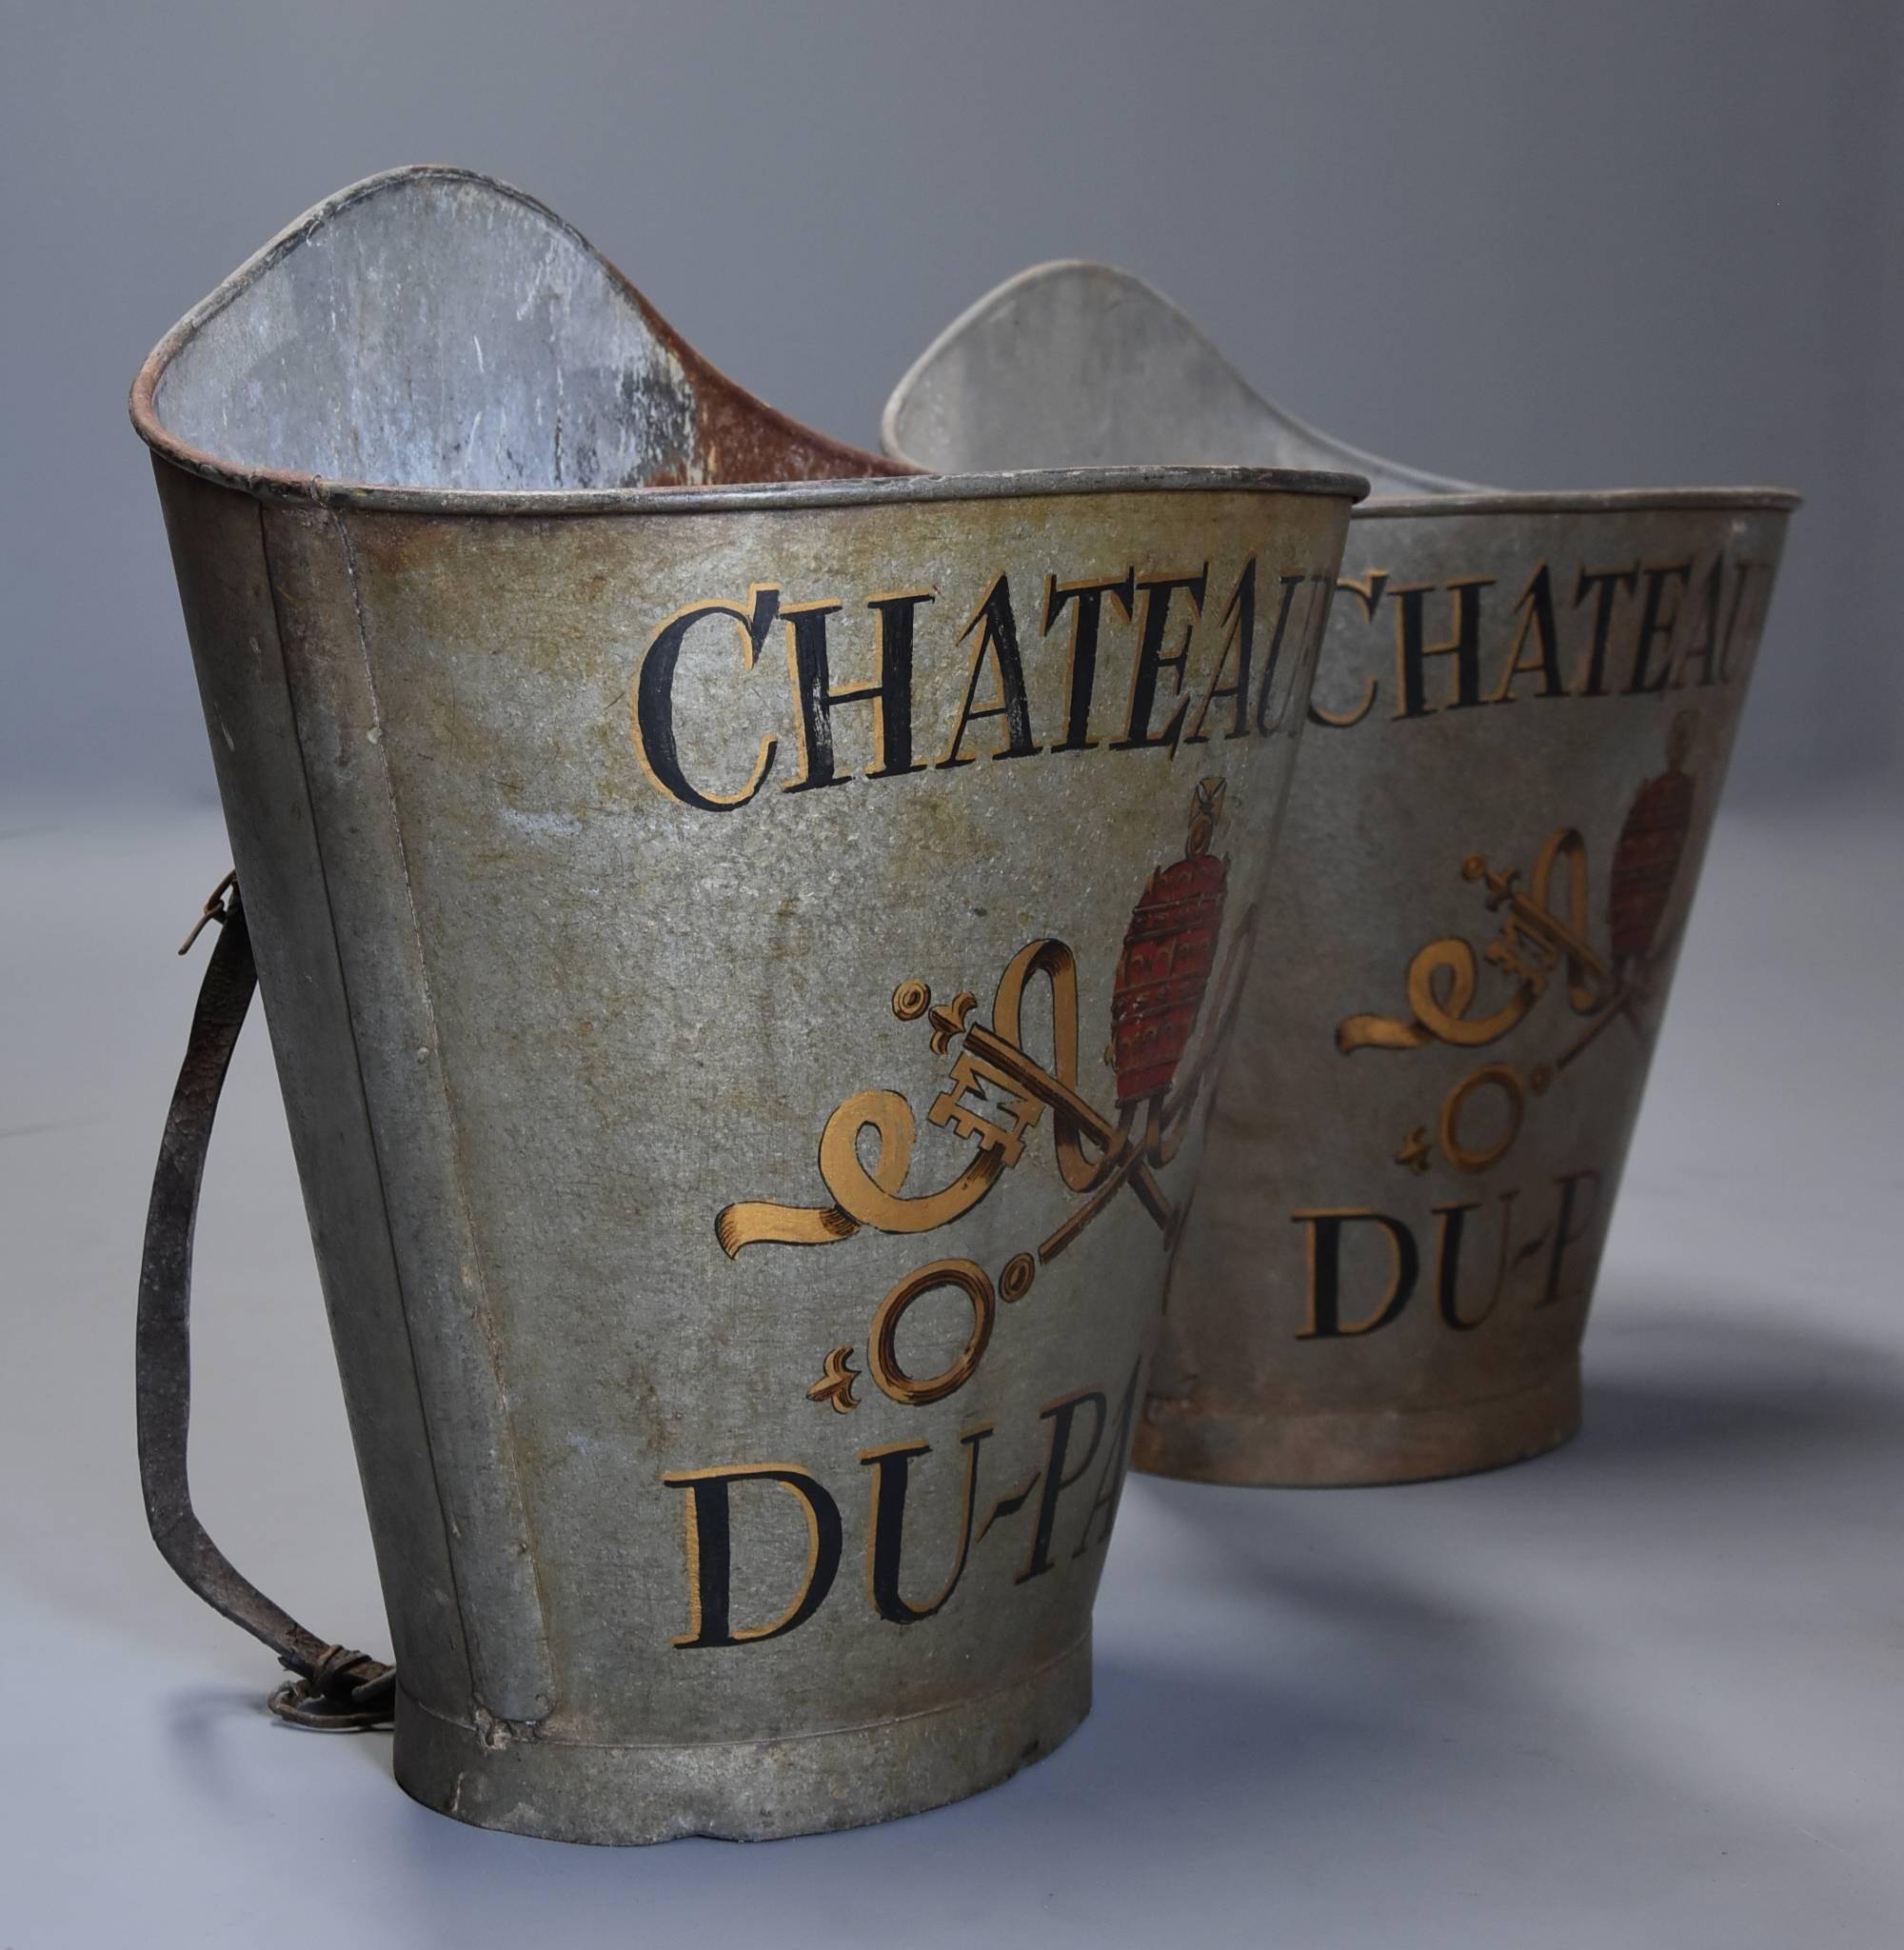 A highly decorative pair of galvanized metal grape carriers with painted decoration from the Chateaneuf-du-Pape wine region of France.

This pair of carriers are painted with original black, gold and red paintwork depicting the vineyard crest with